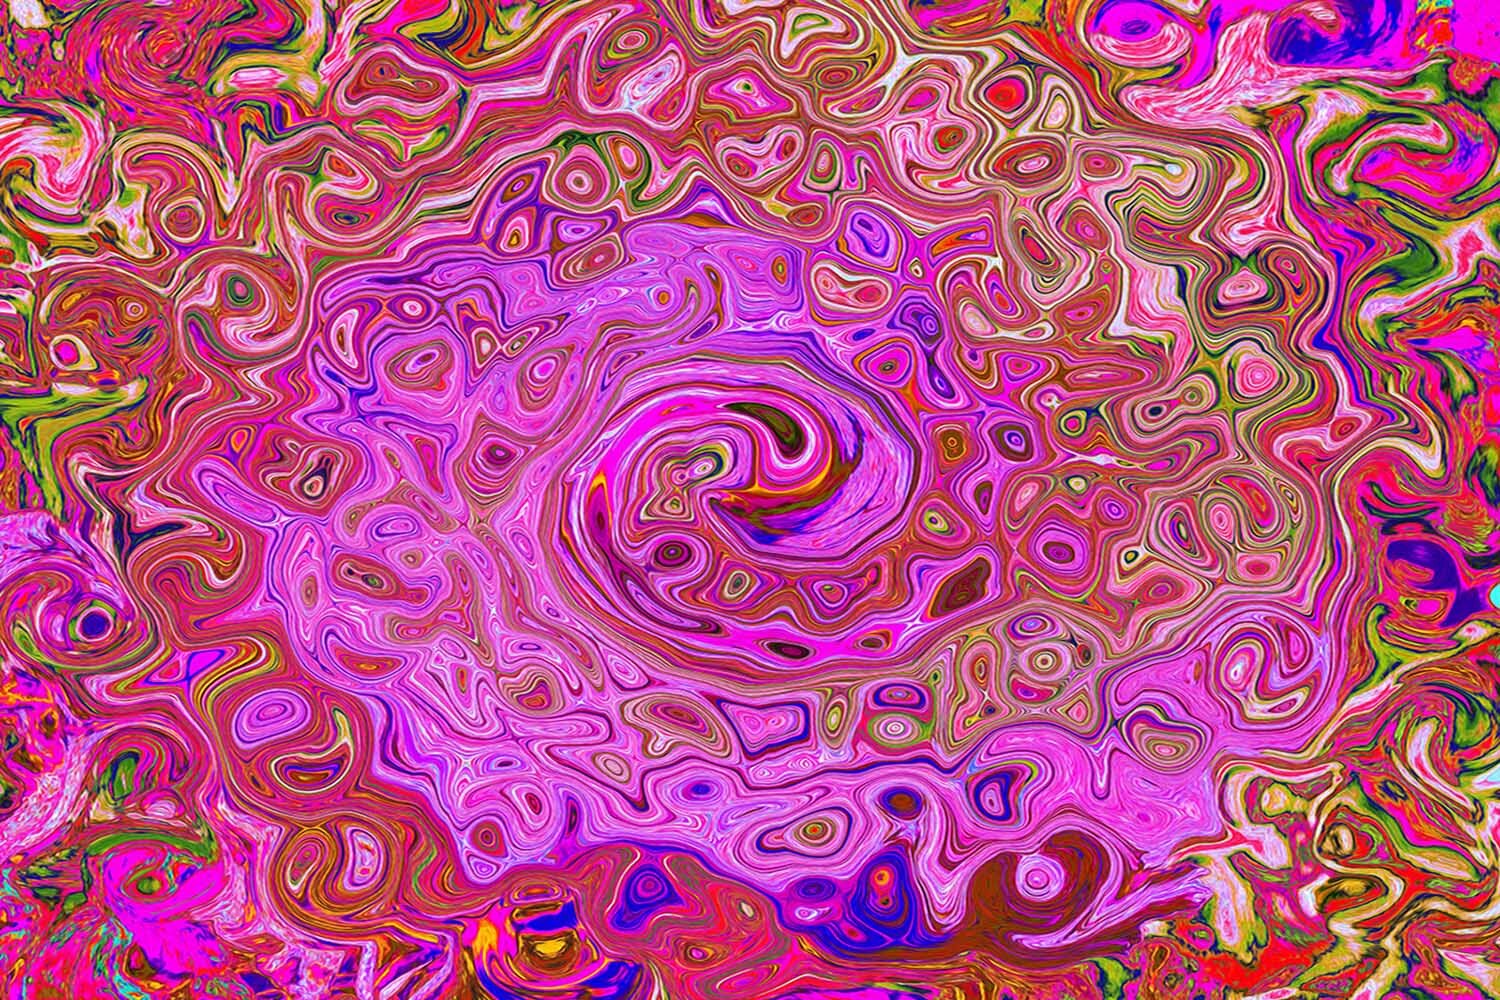 Hot Pink Marbled Colors Abstract Retro Swirl